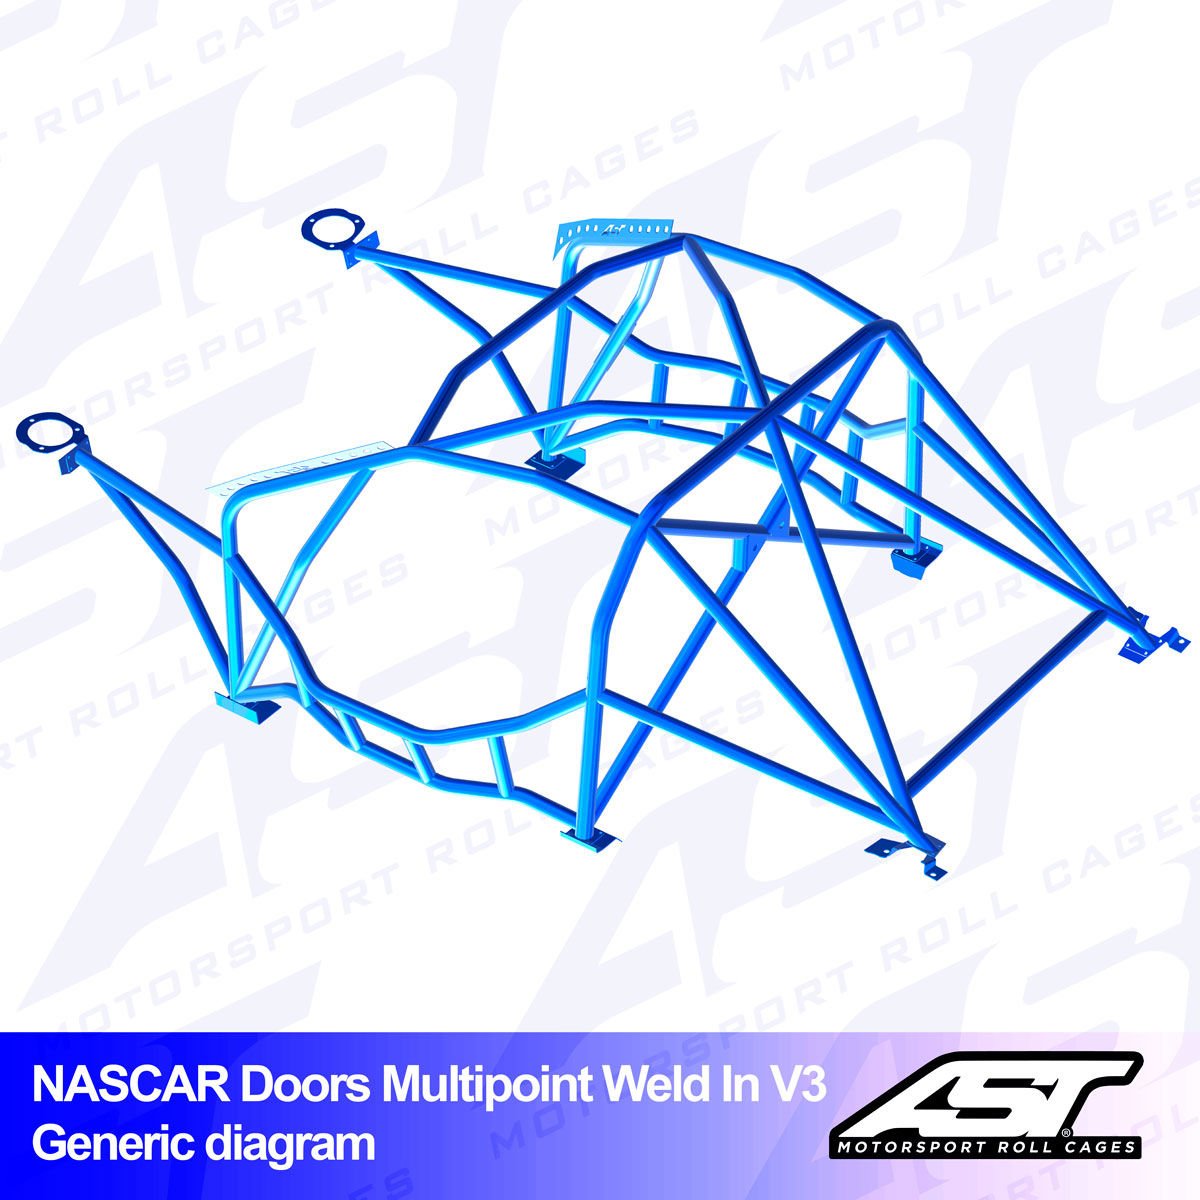 Roll Cage BMW (E46) 3-Series 2-doors Coupe RWD MULTIPOINT WELD IN V3 NASCAR-door for drift